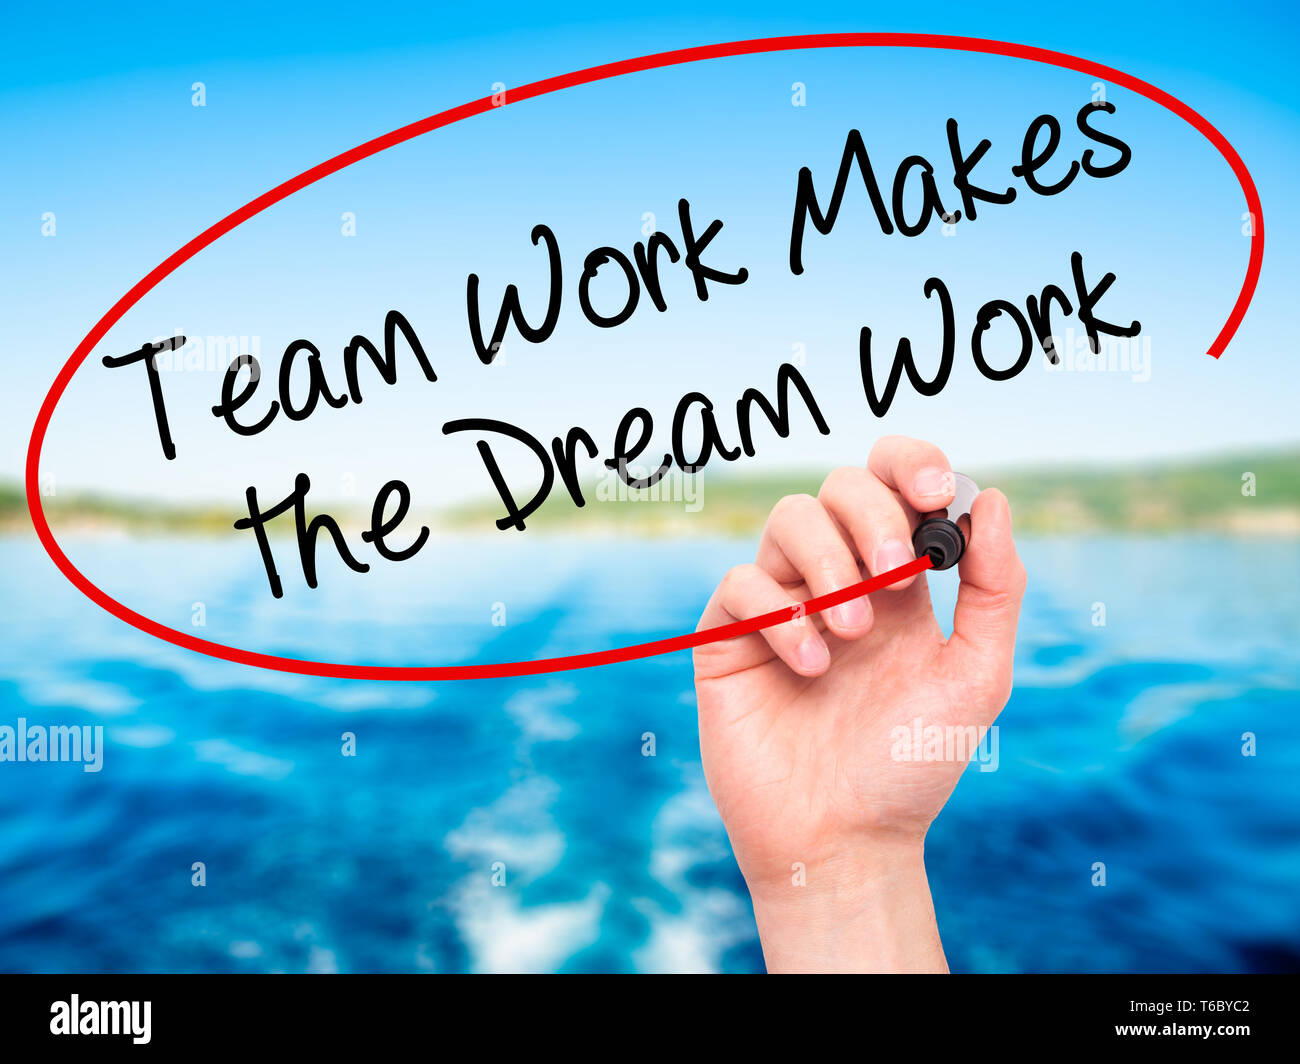 Man Hand writing Team Work Makes the Dream Work with black marker on visual screen Stock Photo